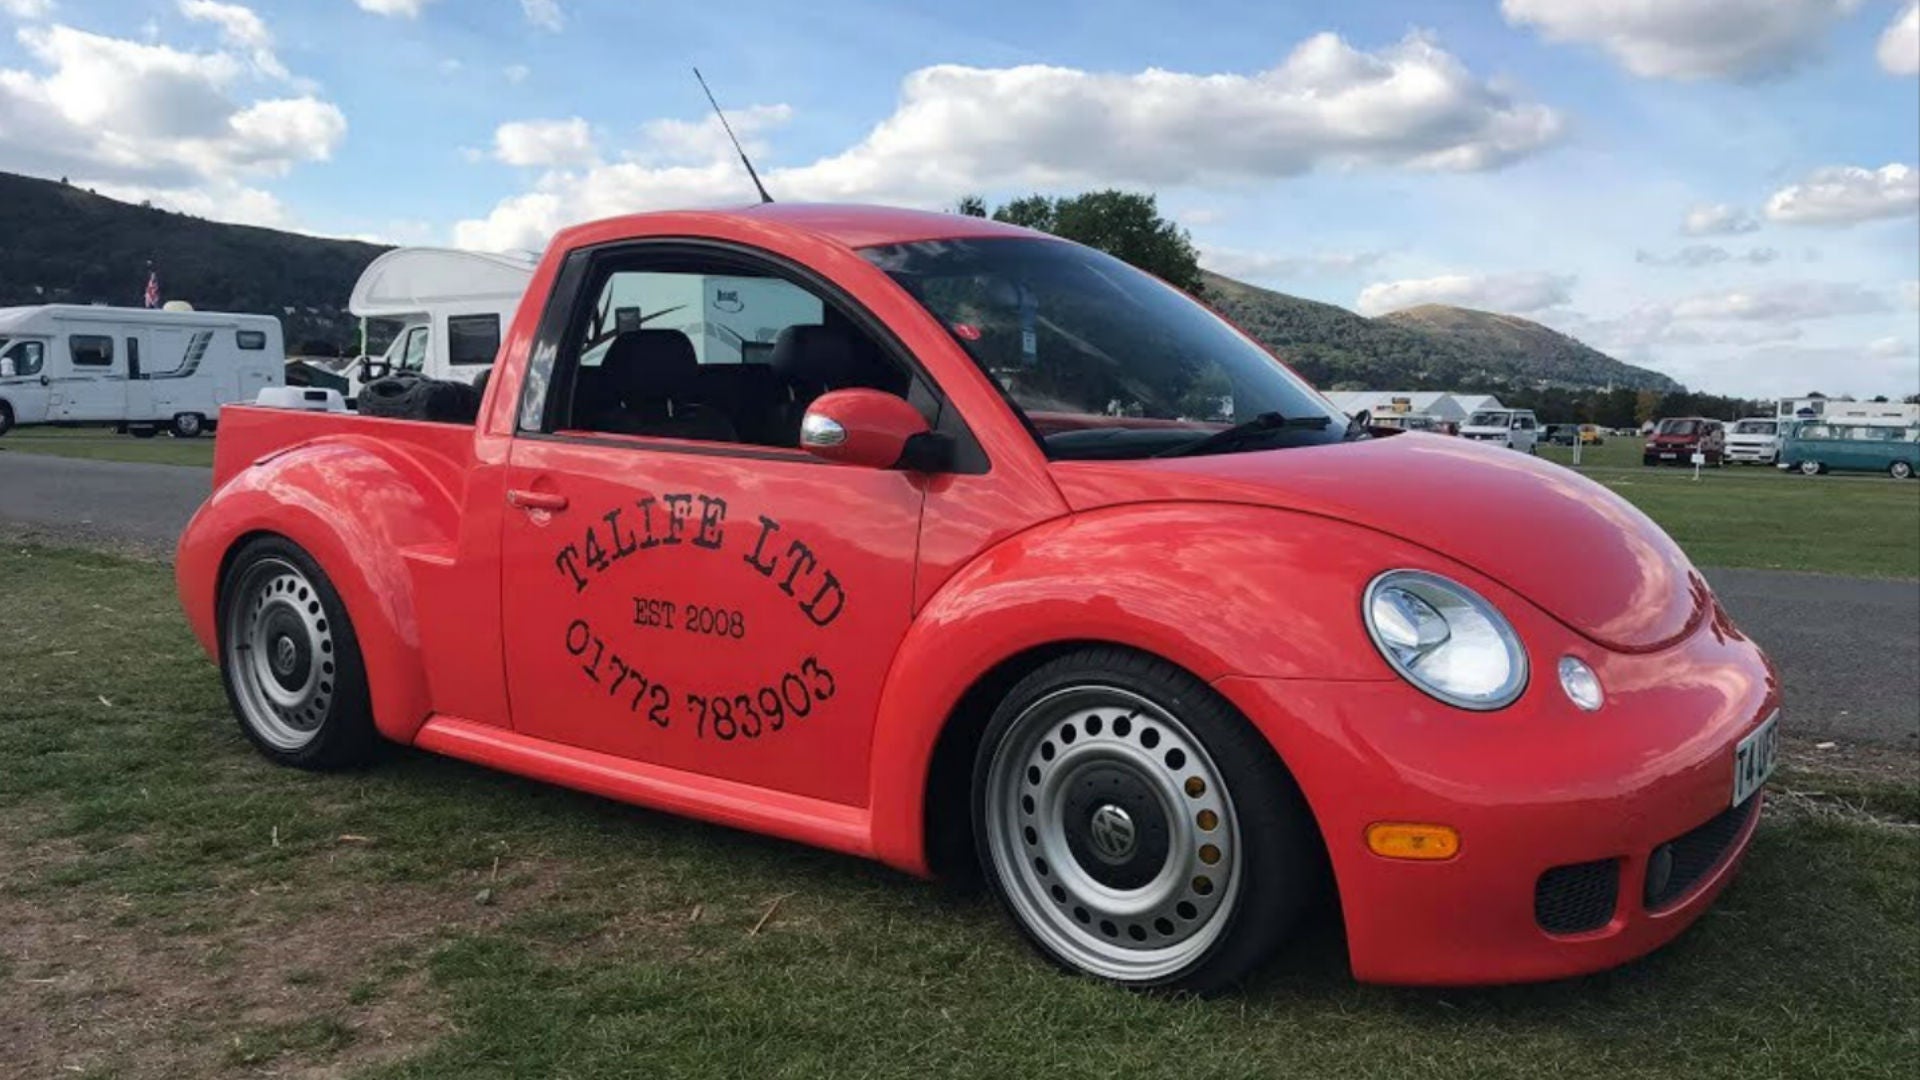 Turn Your VW Beetle Into an Adorable Pickup Truck With This $3,000 Kit